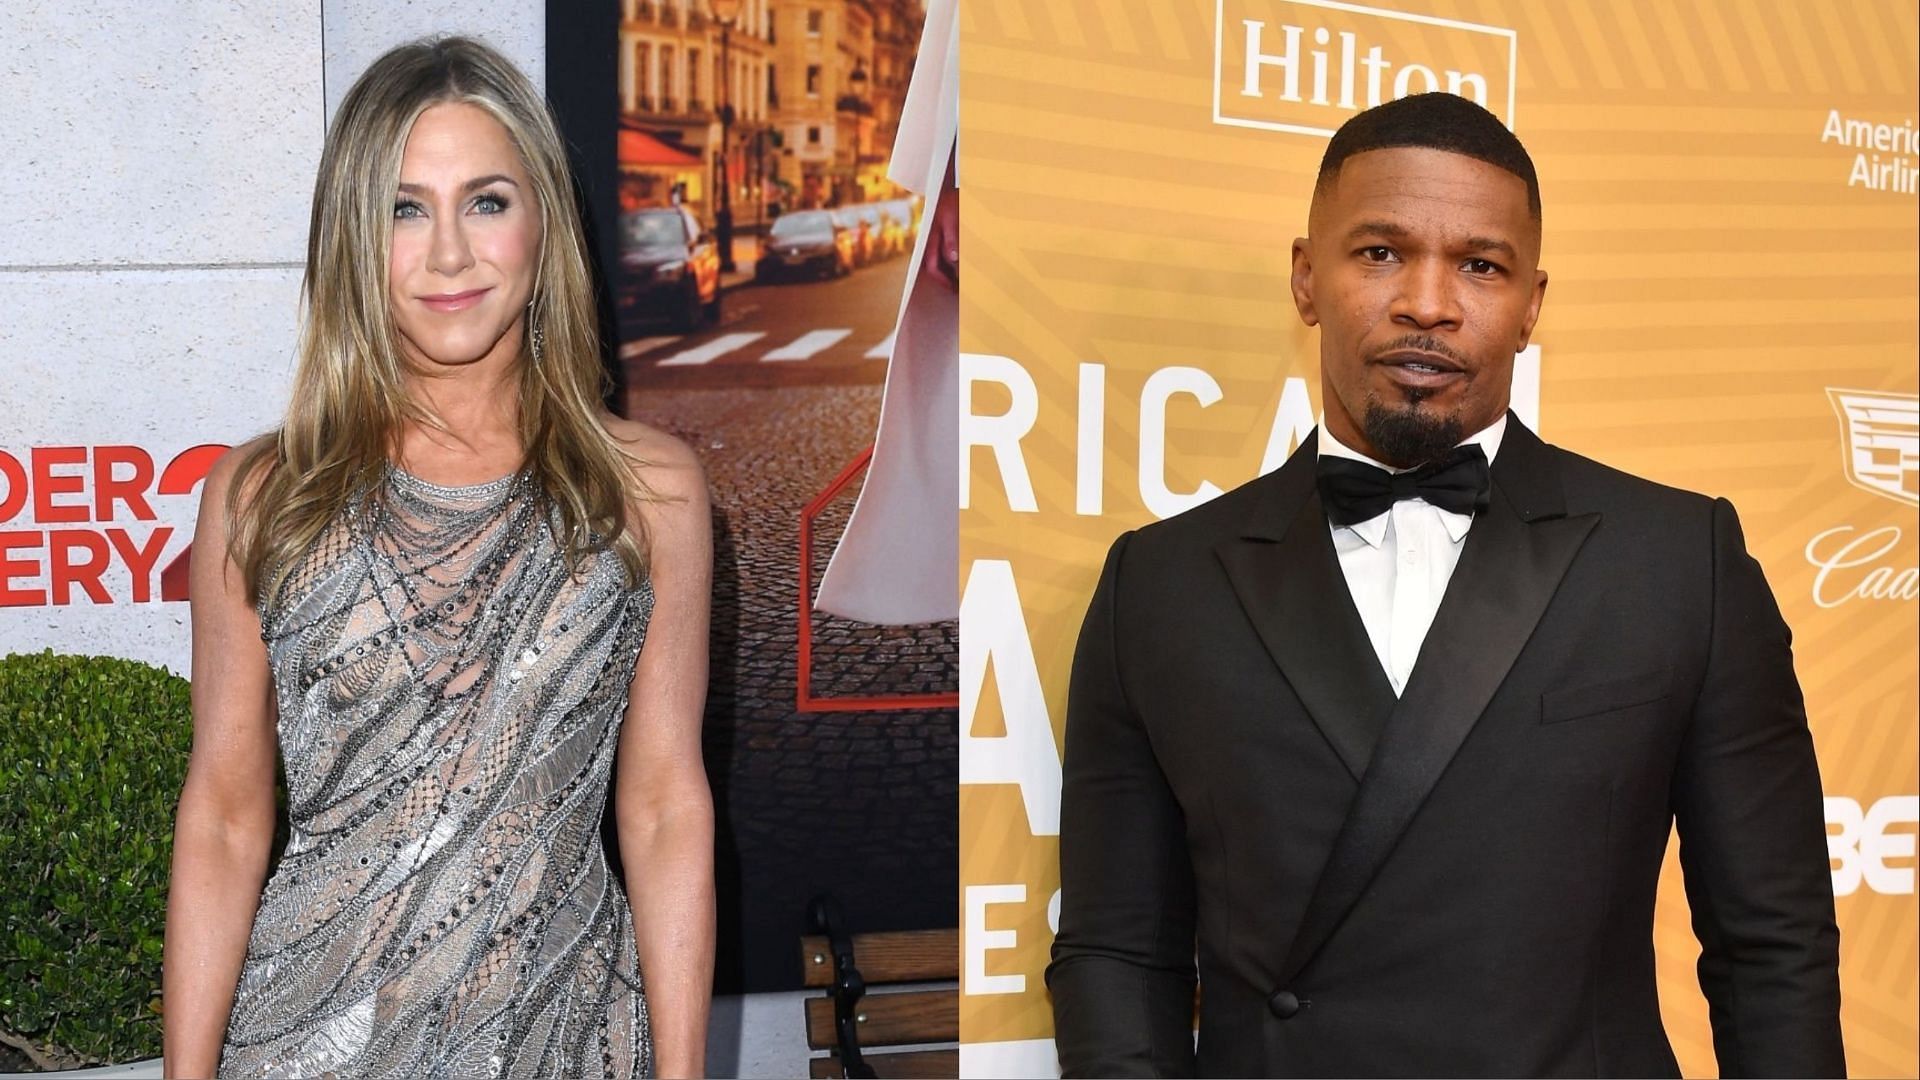 Jennifer Aniston talks about the backlash from recent Jamie Foxx anti-semitism controversy. (Images via Getty Images)